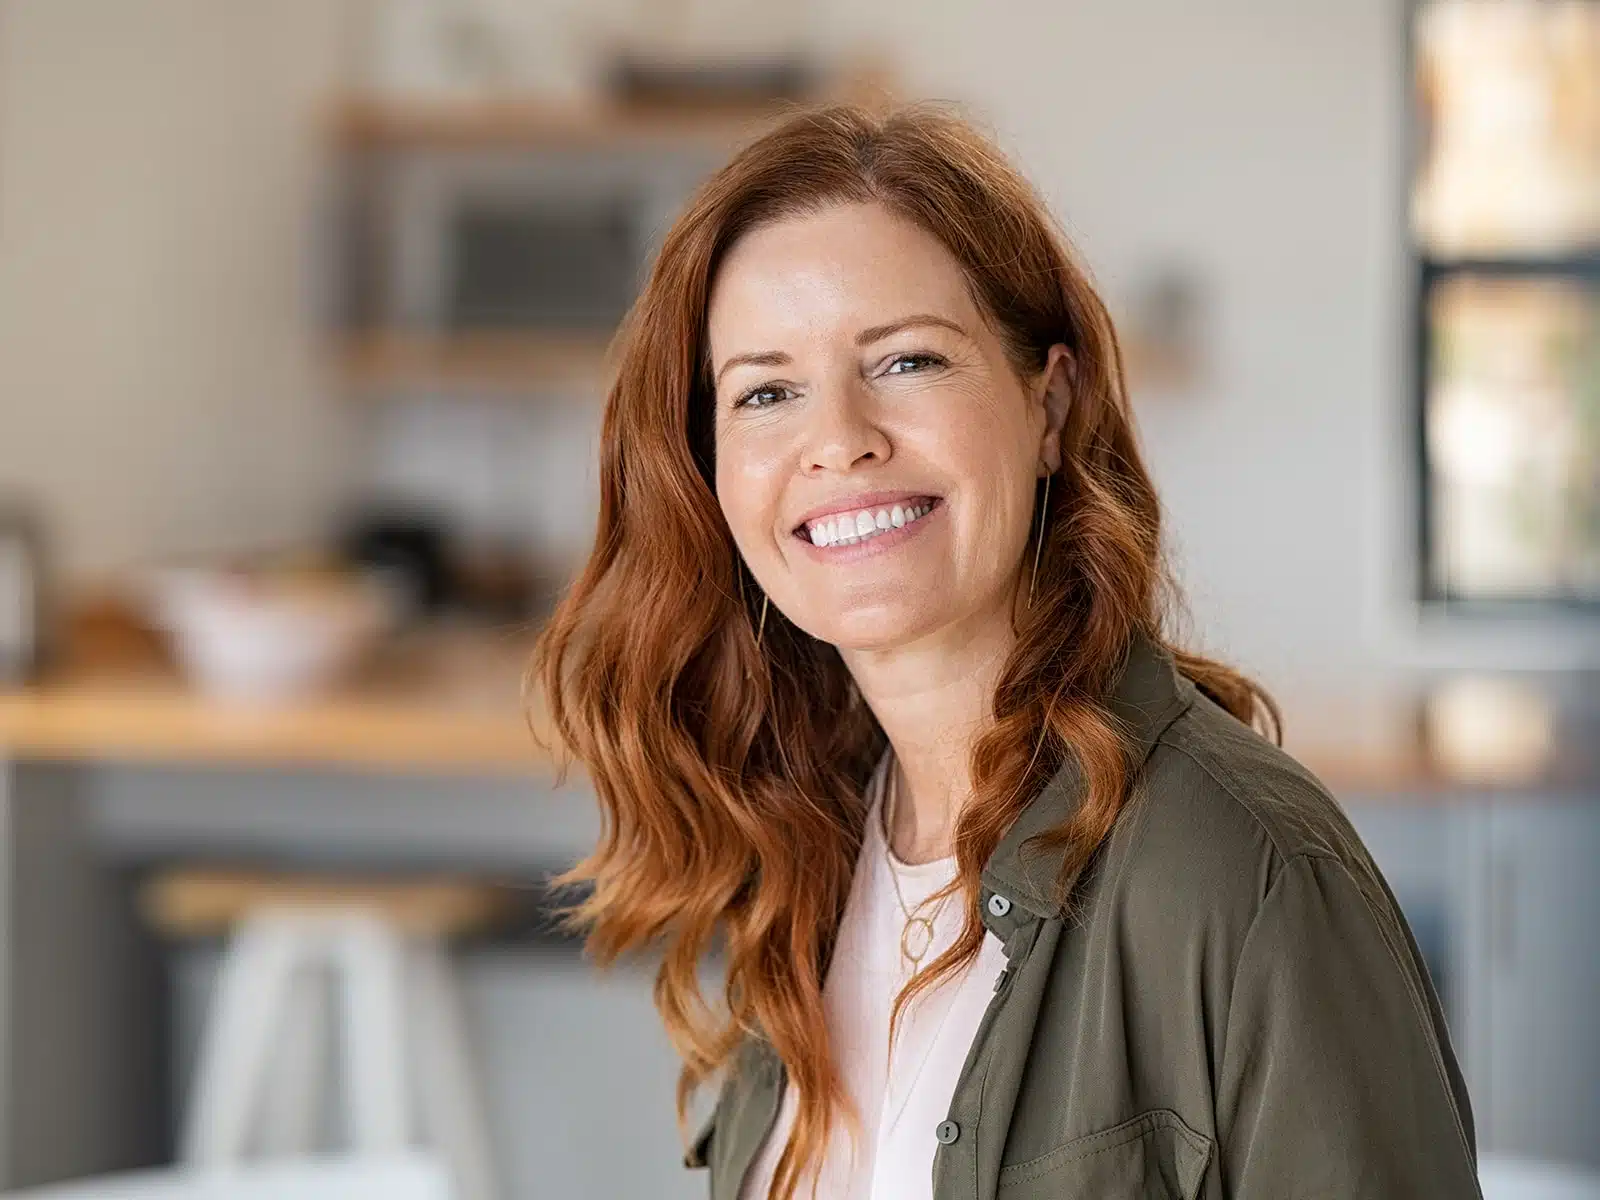 Woman with red hair smiling